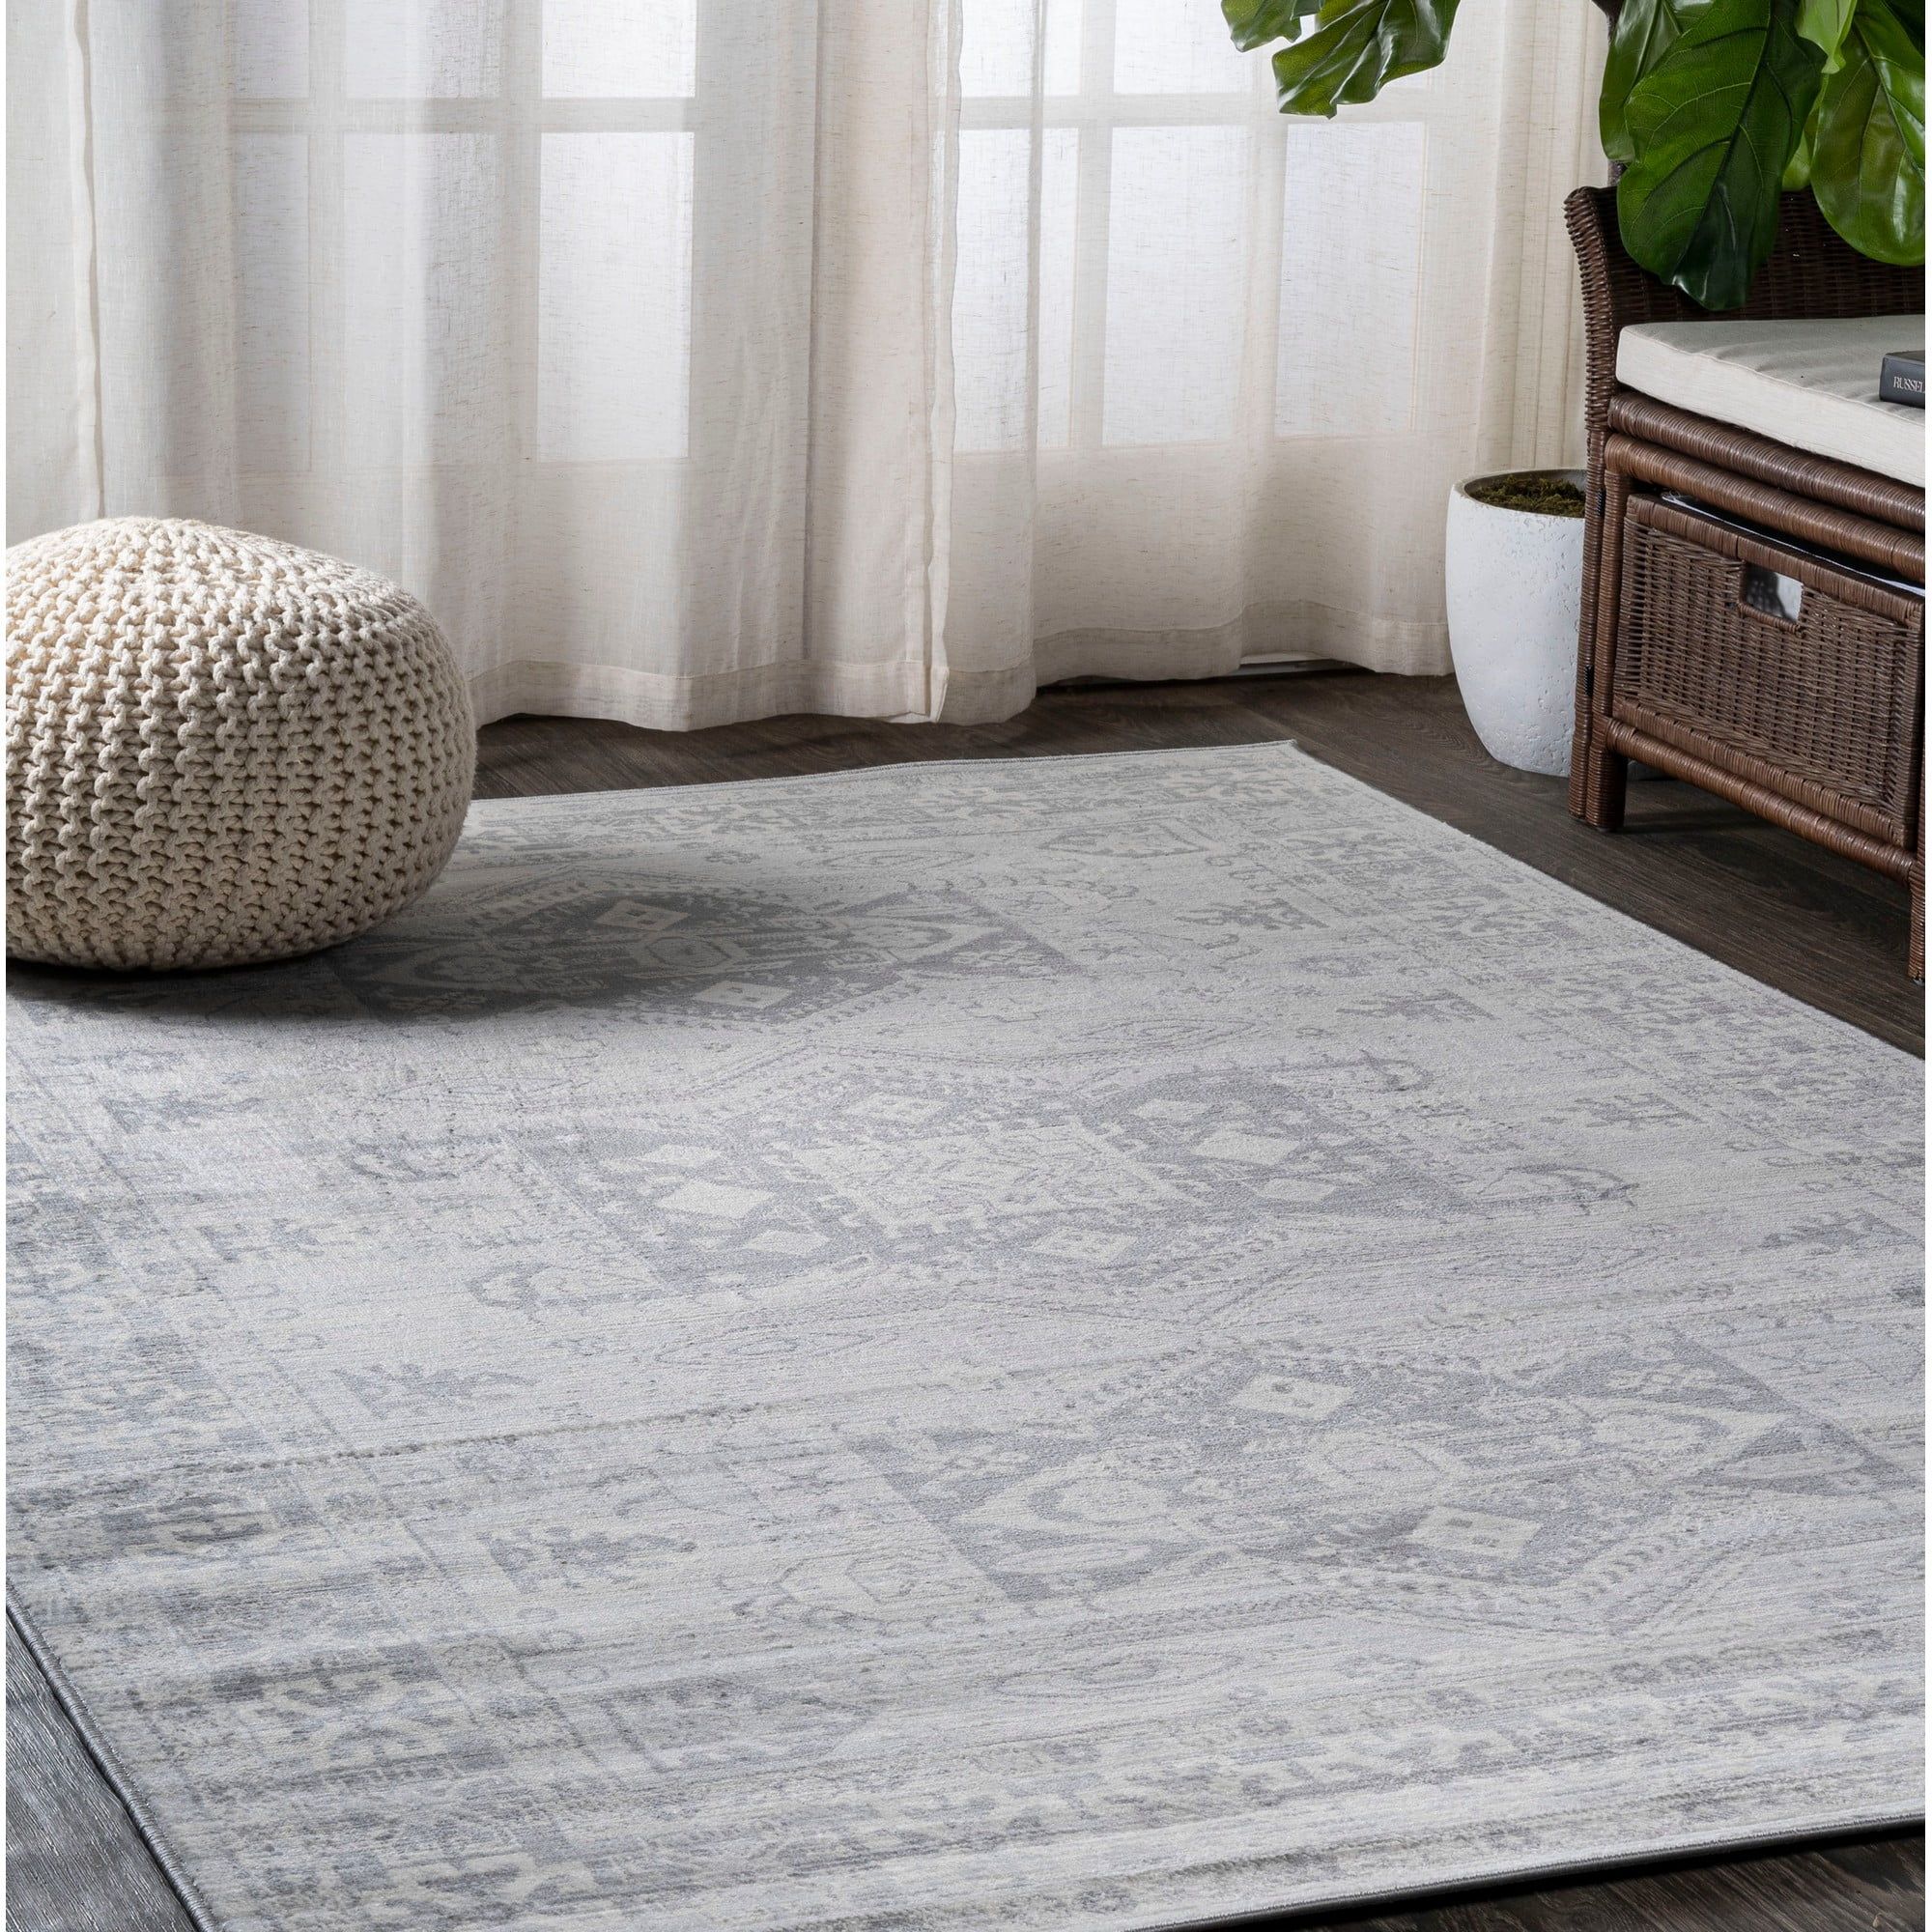 Reversible Easy-Care Synthetic Kids Rug in Light Gray, 8' x 10'